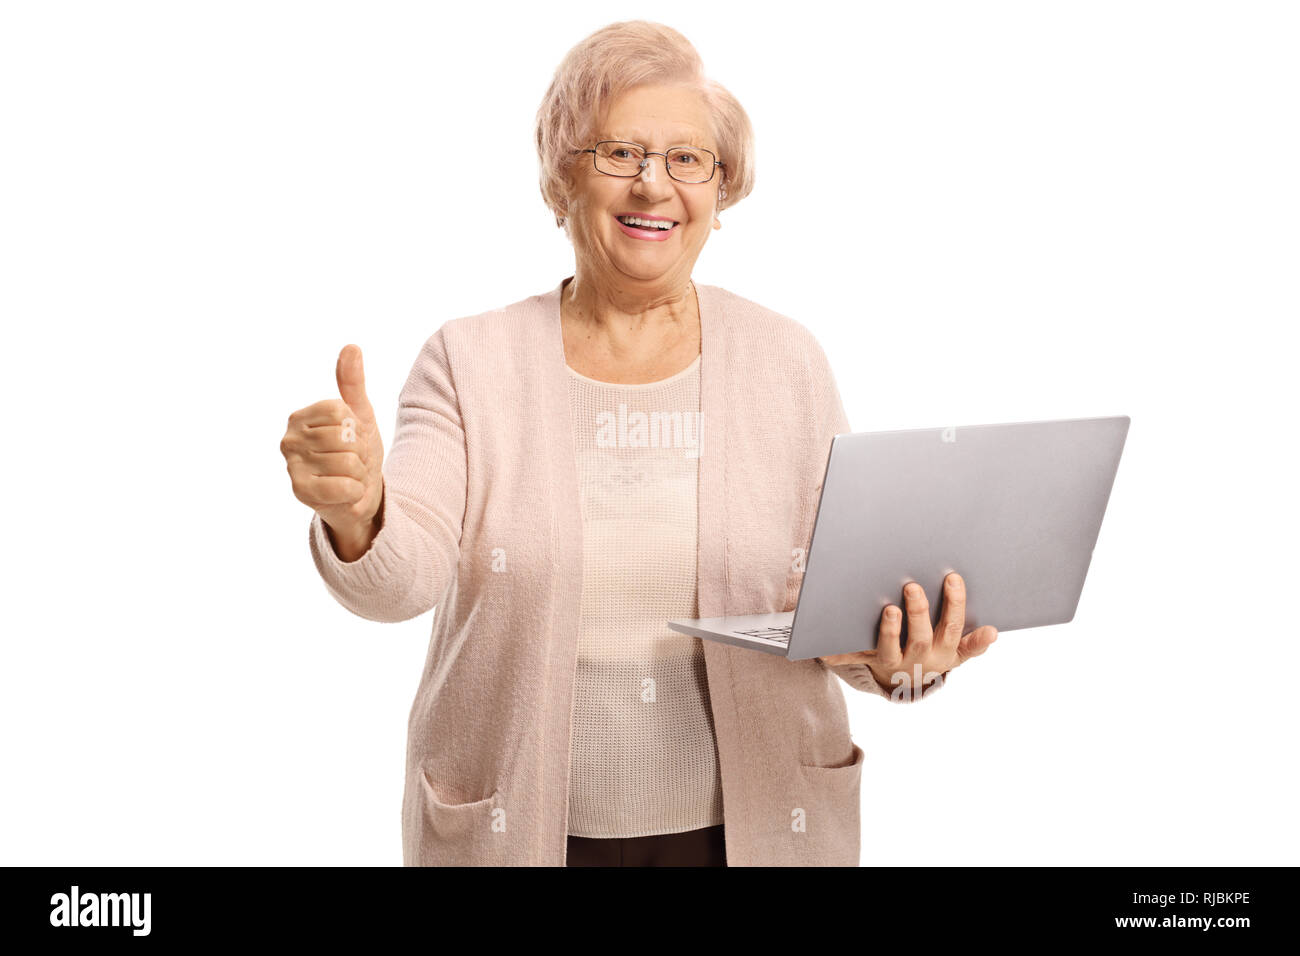 Happy senior woman holding a laptop computer and showing thumbs up isolated on white background Stock Photo